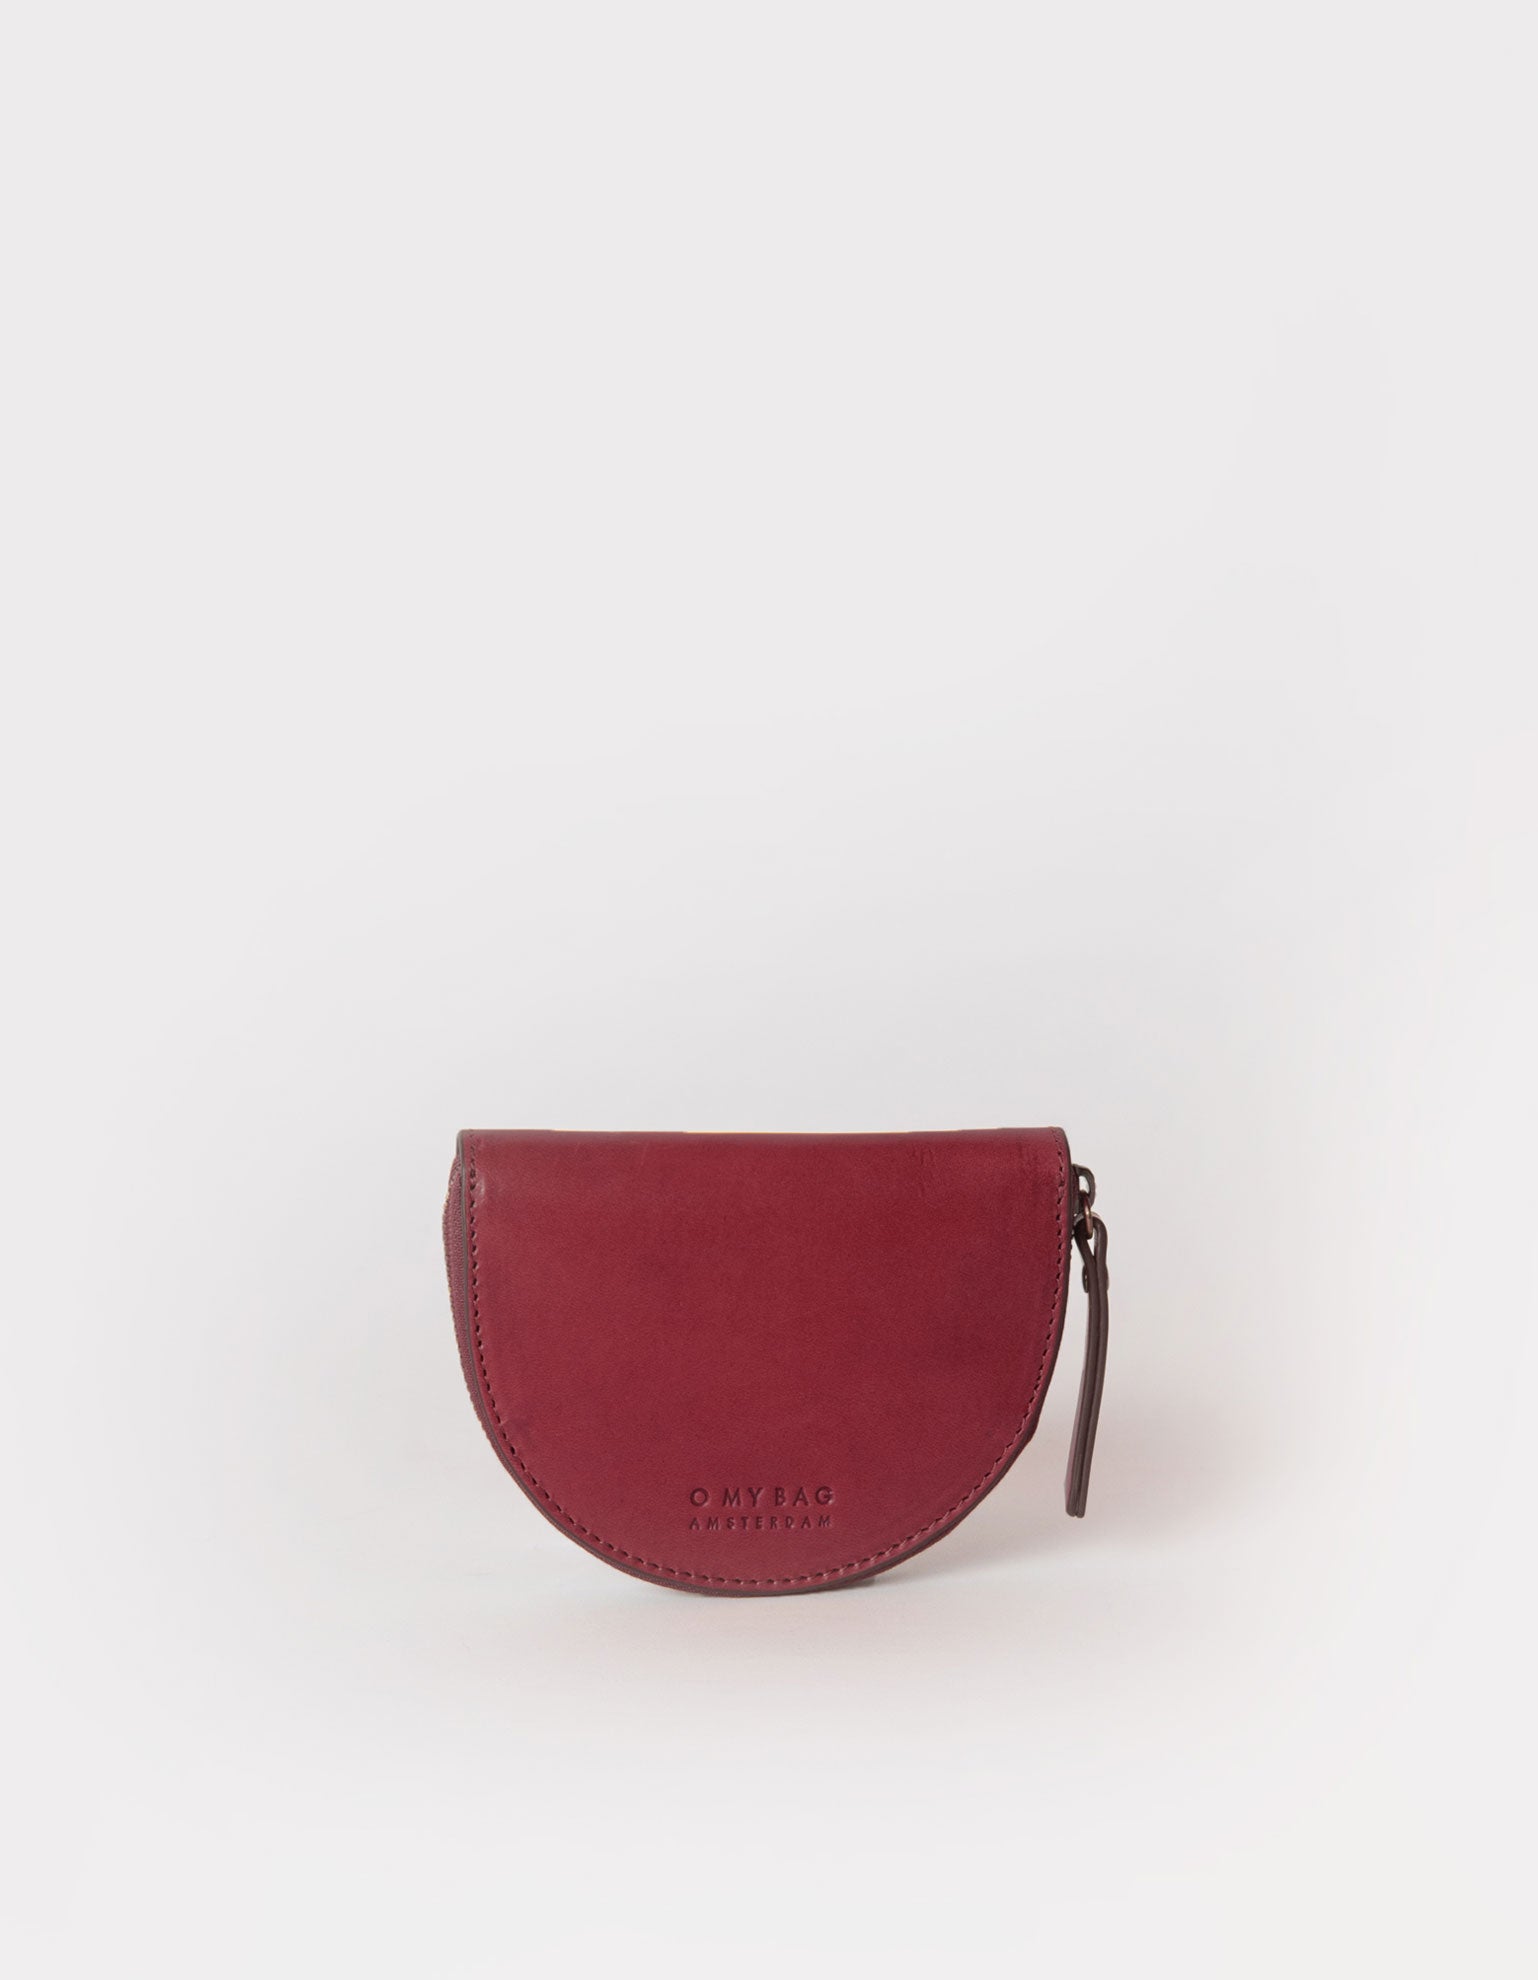 Laura Coin Purse in Ruby Classic Leather. Front product image.